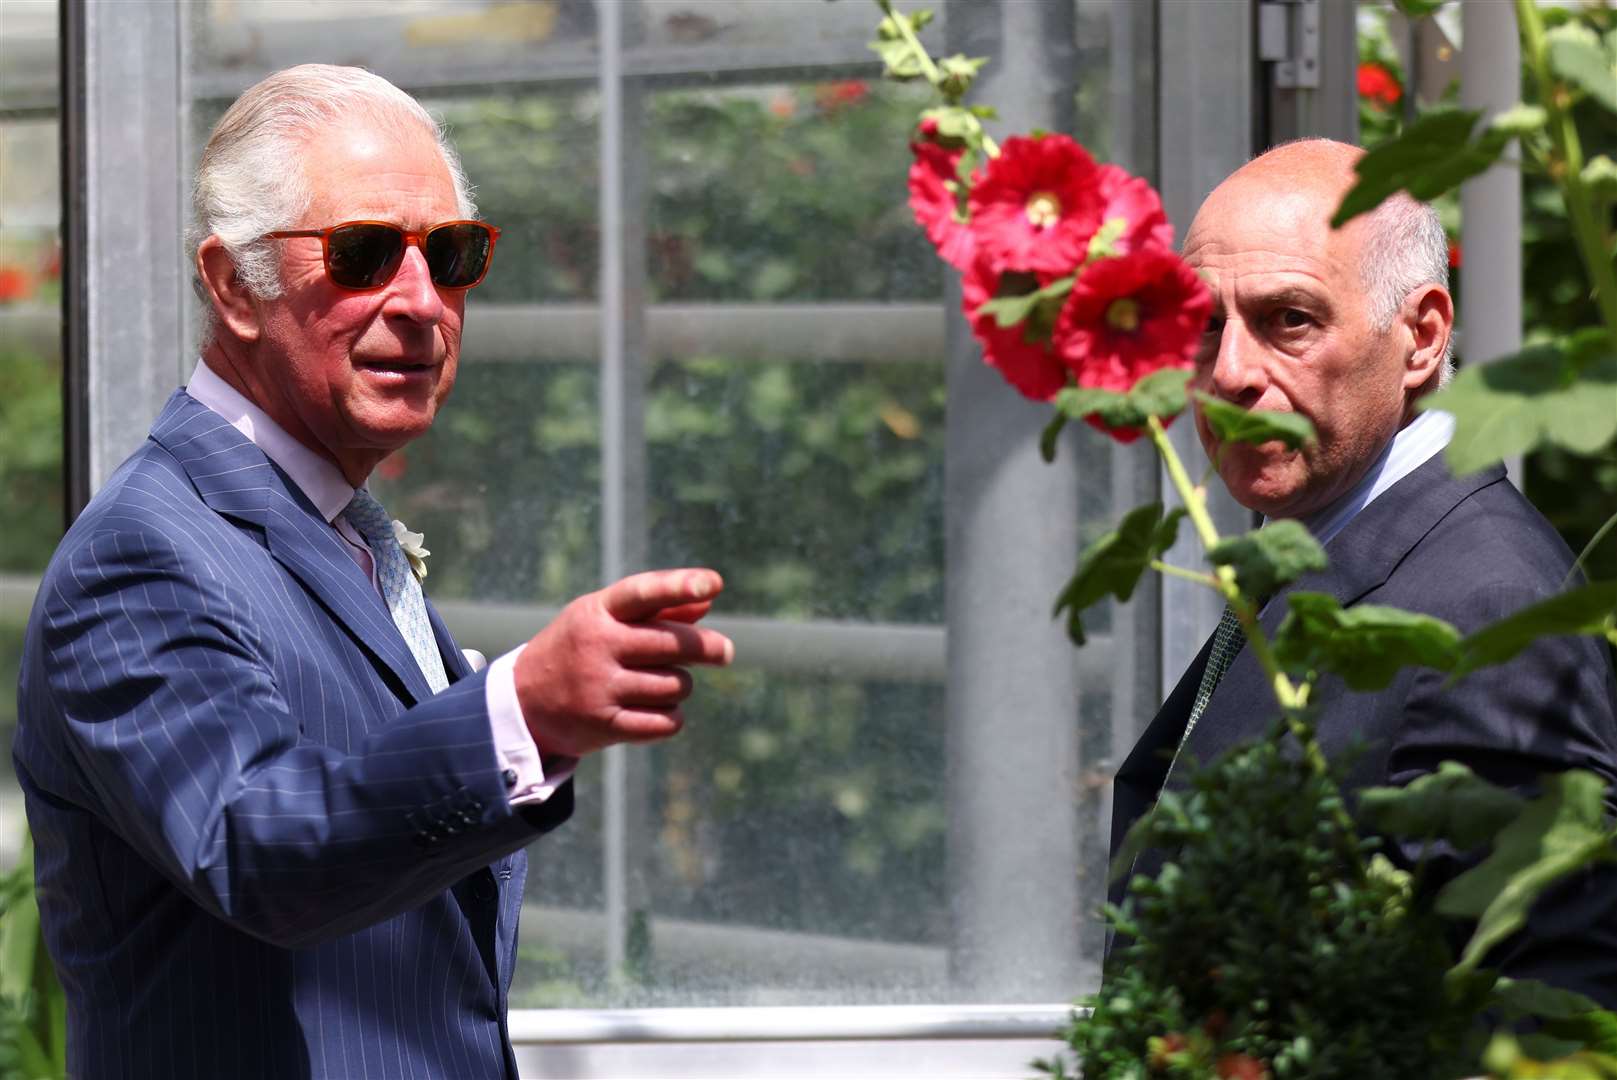 The Prince of Wales during a visit to Hyde Park (Tom Nicholson/PA)